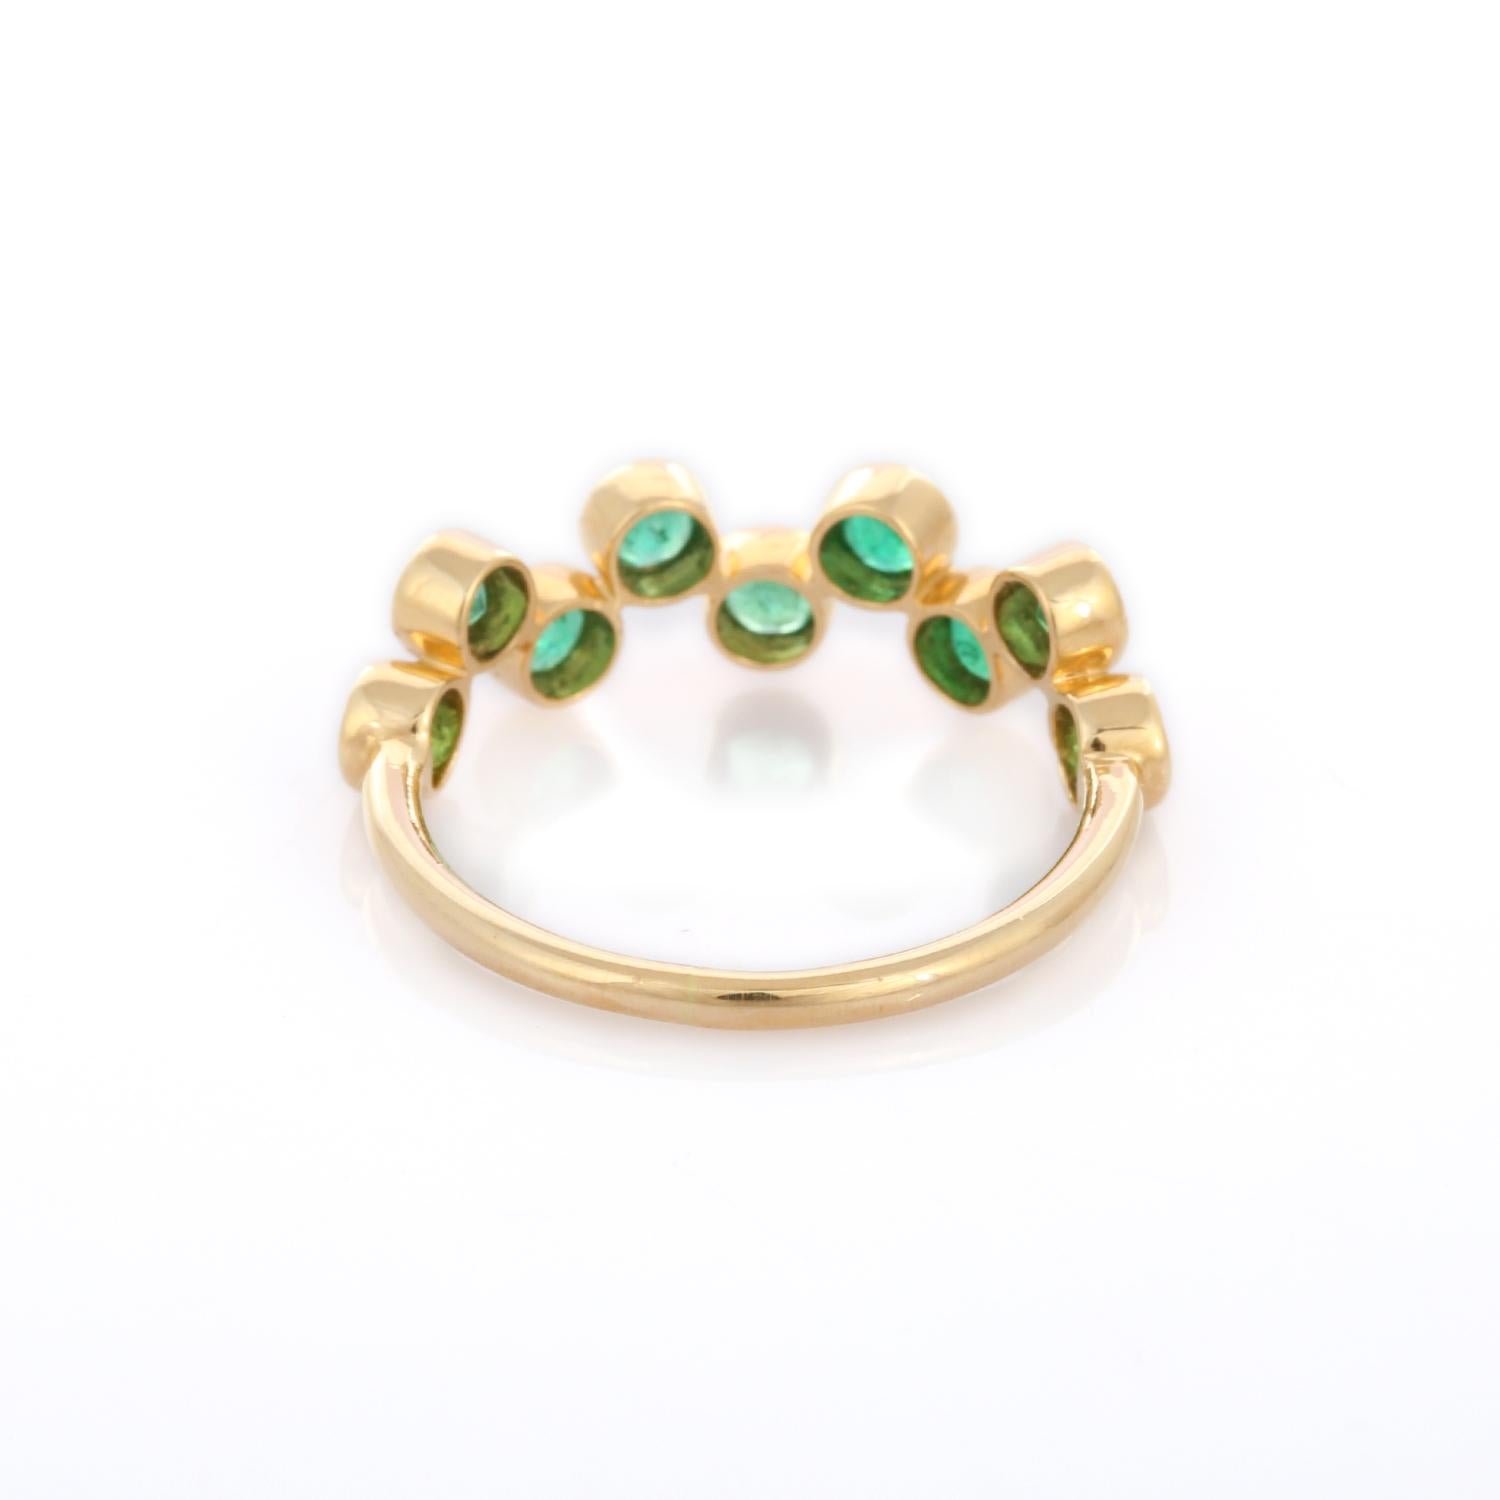 For Sale:  Emerald Gemstone Stacking Ring in 18K Yellow Gold 5